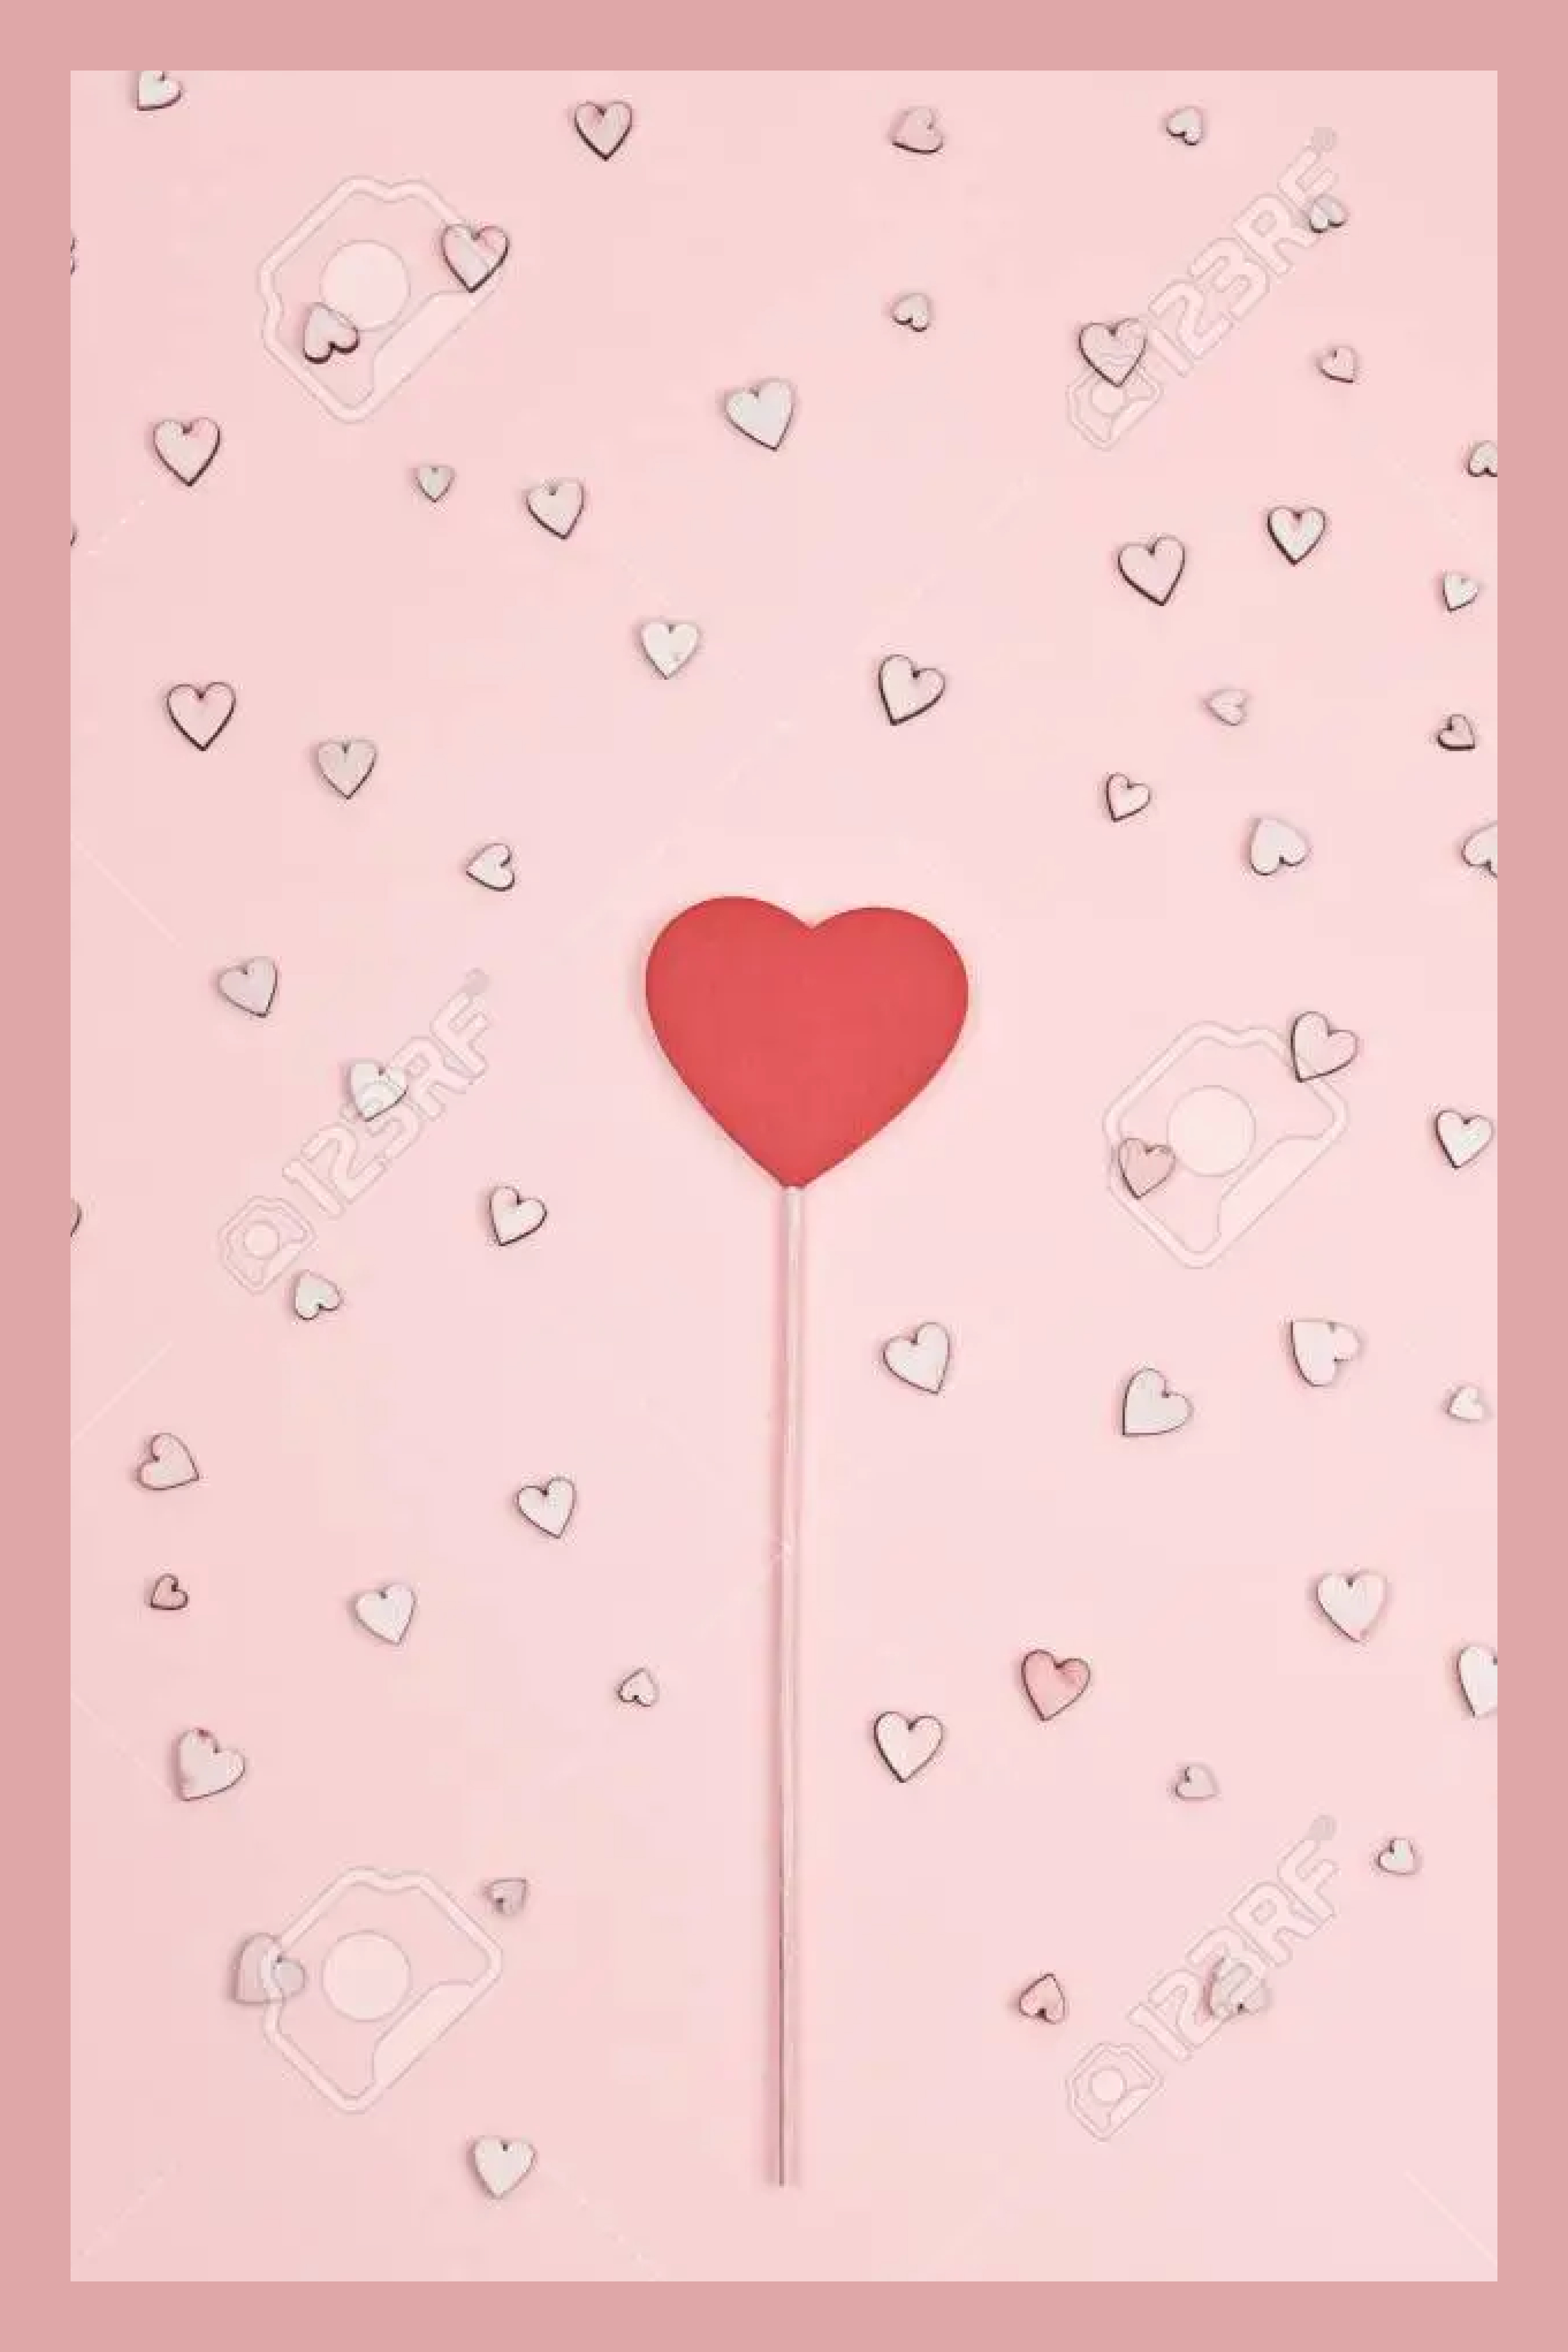 Many little hearts on tender pink backgrounds.